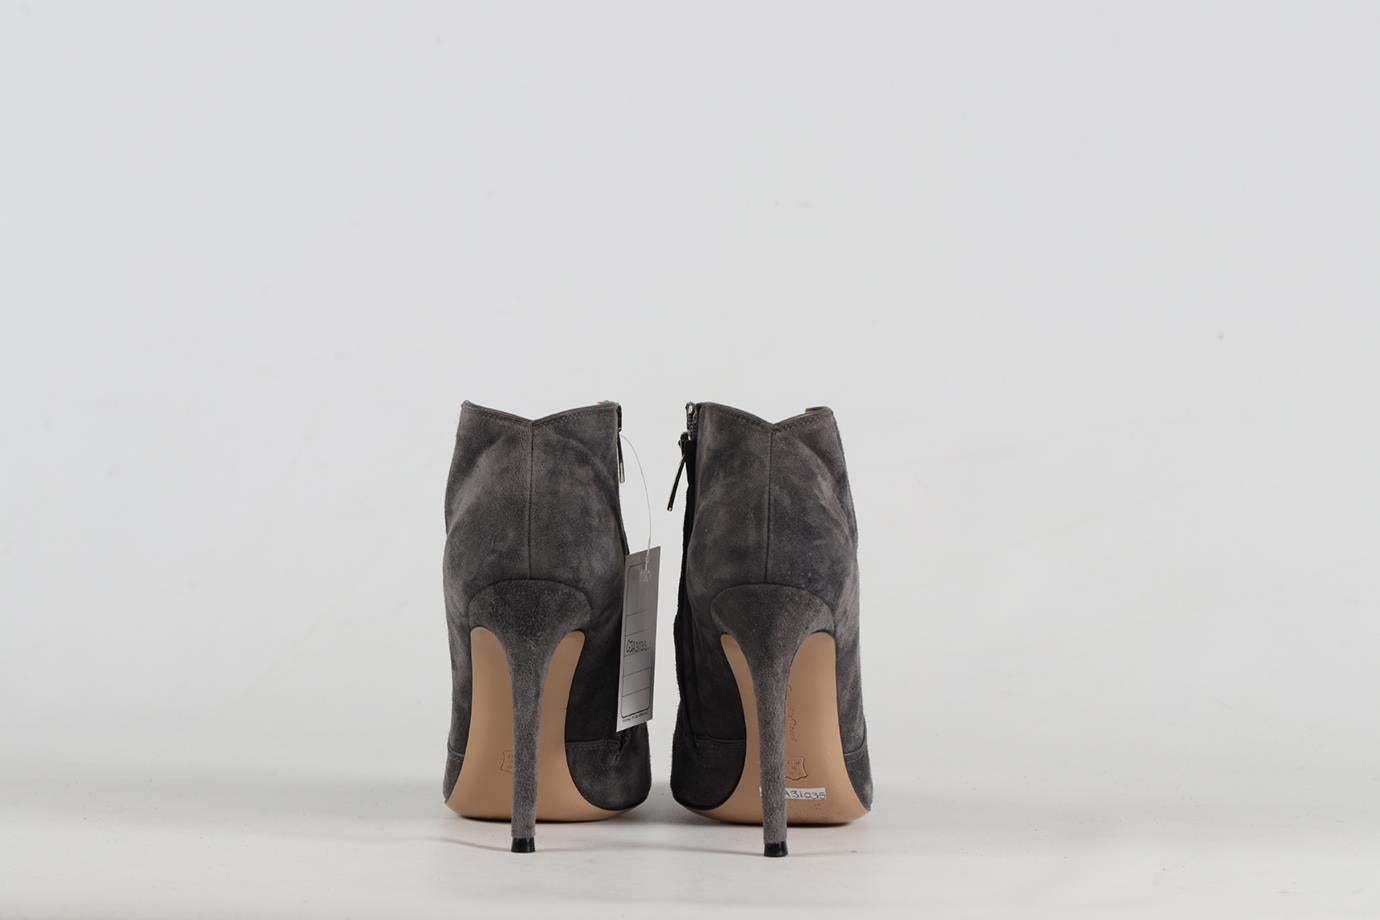 GIANVITO ROSSI SUEDE ANKLE BOOTS EU 38 UK 5 US 8